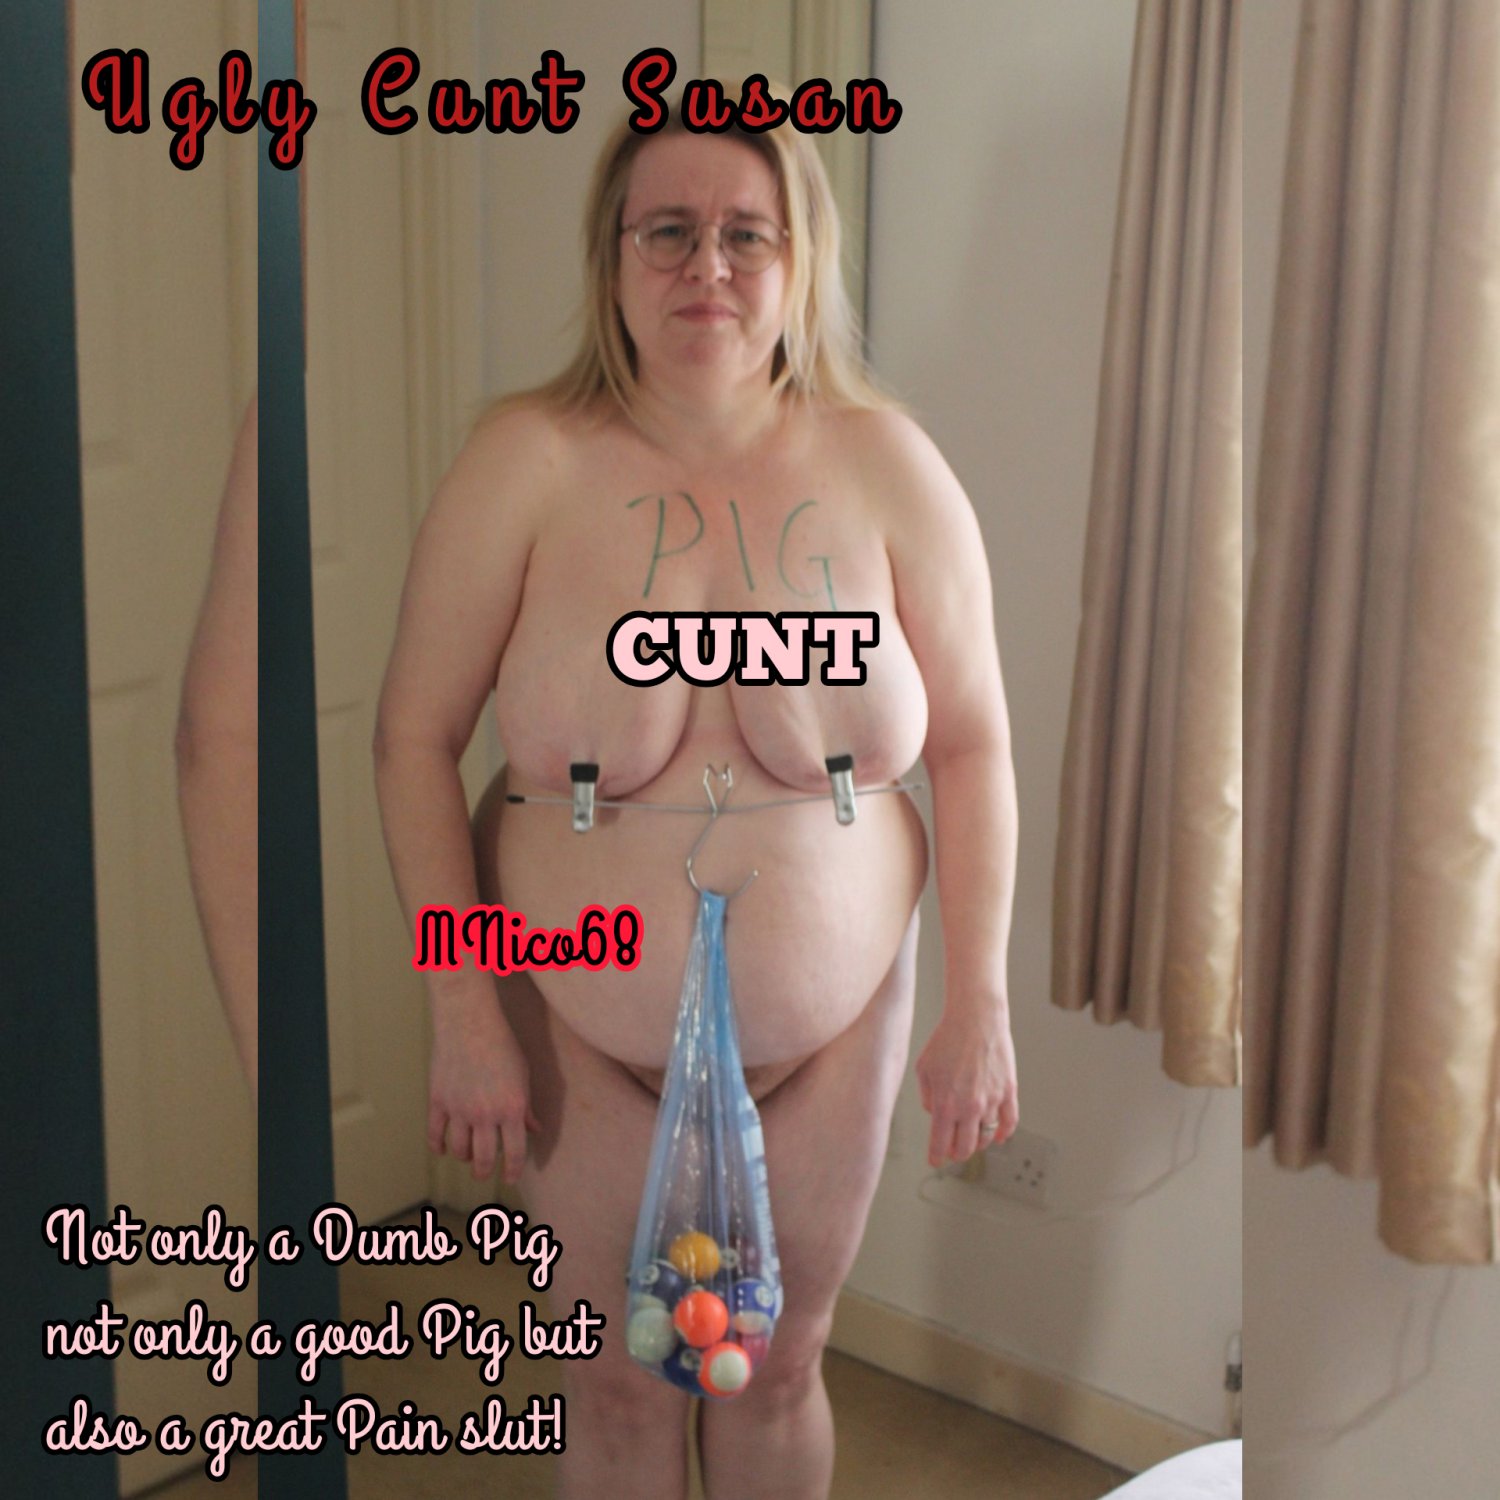 Ugly Cunt Susan, UK Fat Pig to use/abuse/humiliation,comment on... photo pic